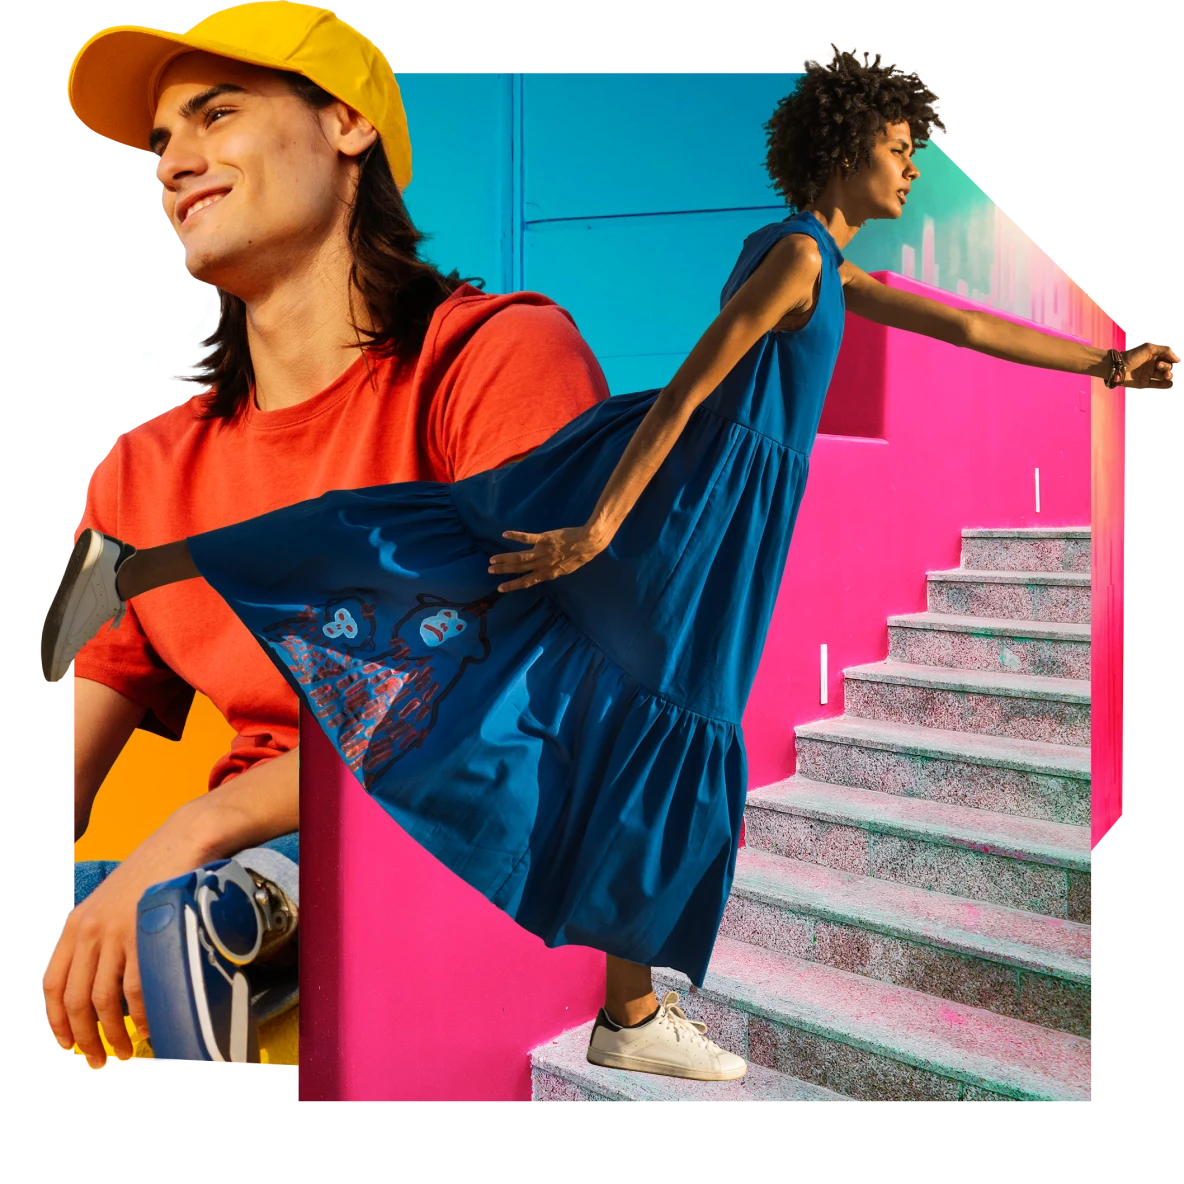 A white man with prosthetic legs and long black hair wears a yellow hat and an orange shirt.  Black woman wearing a red dress on the gray steps of a red staircase.  Blue blue.